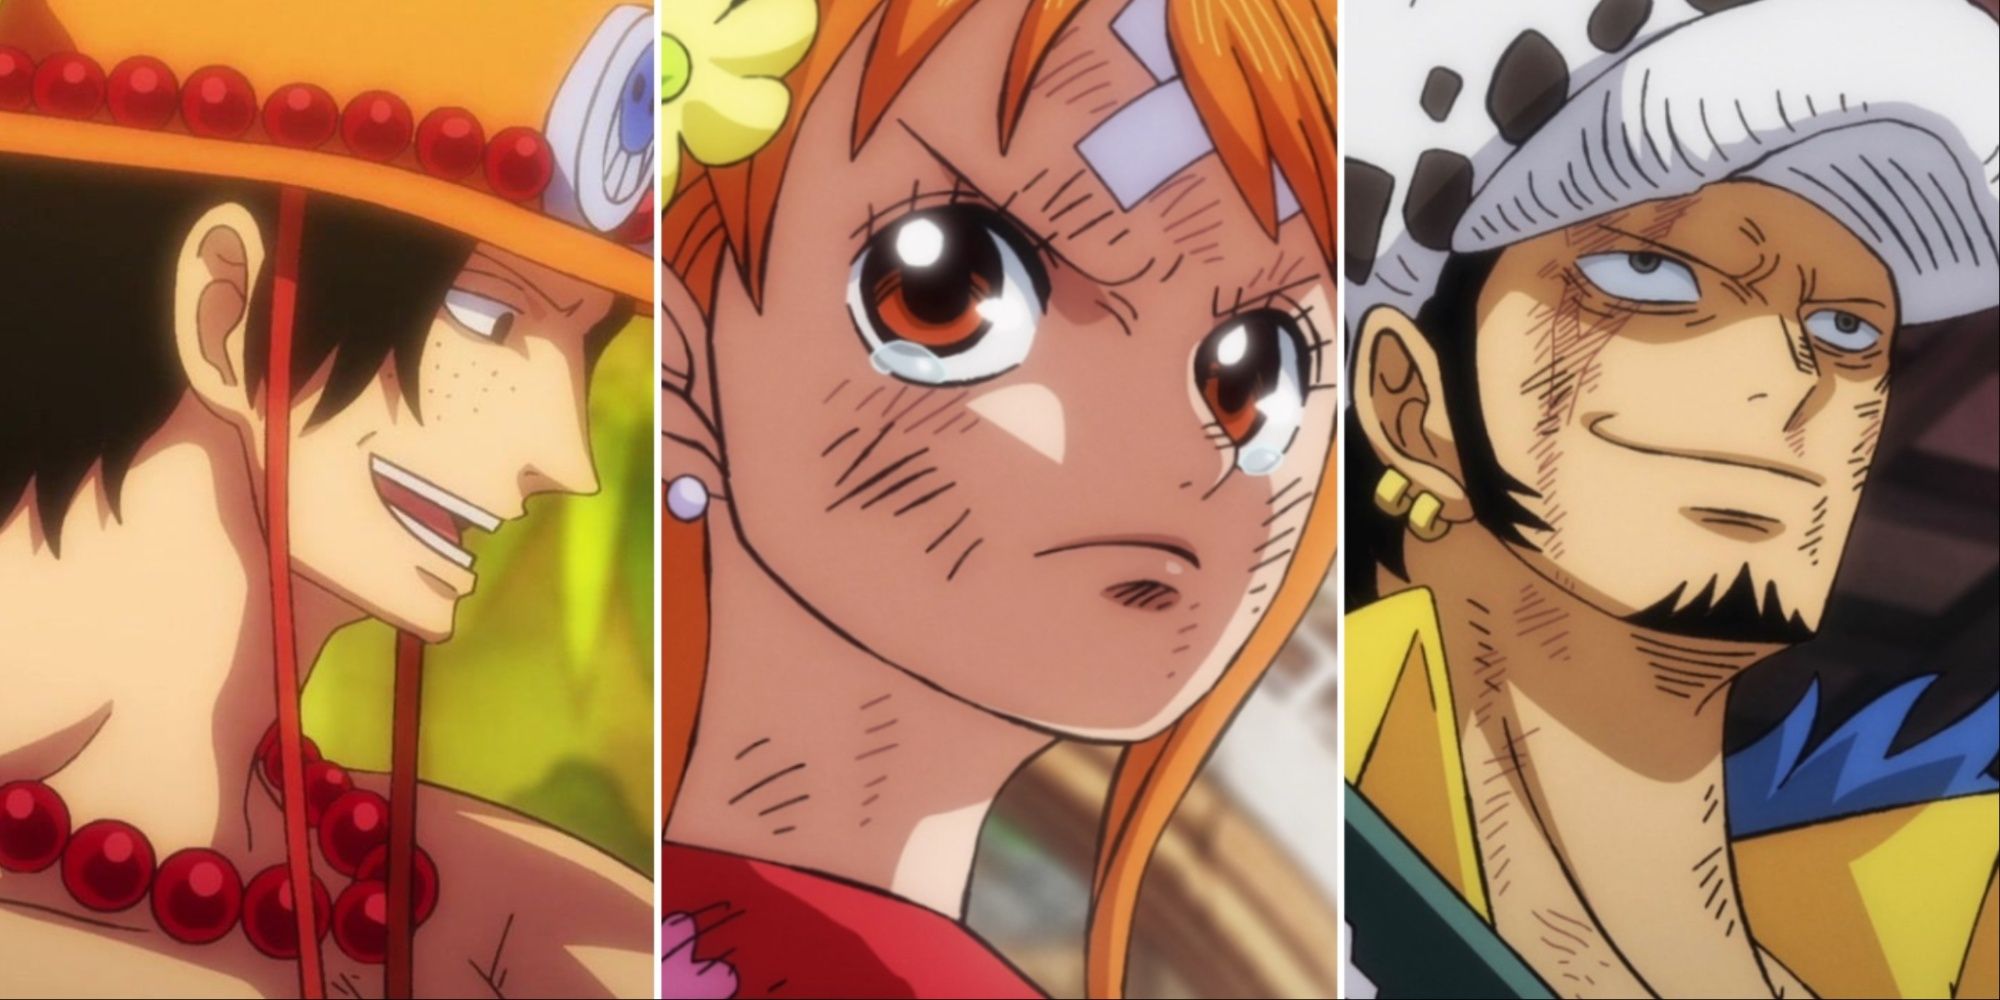 Top 10 Strongest One Piece Characters